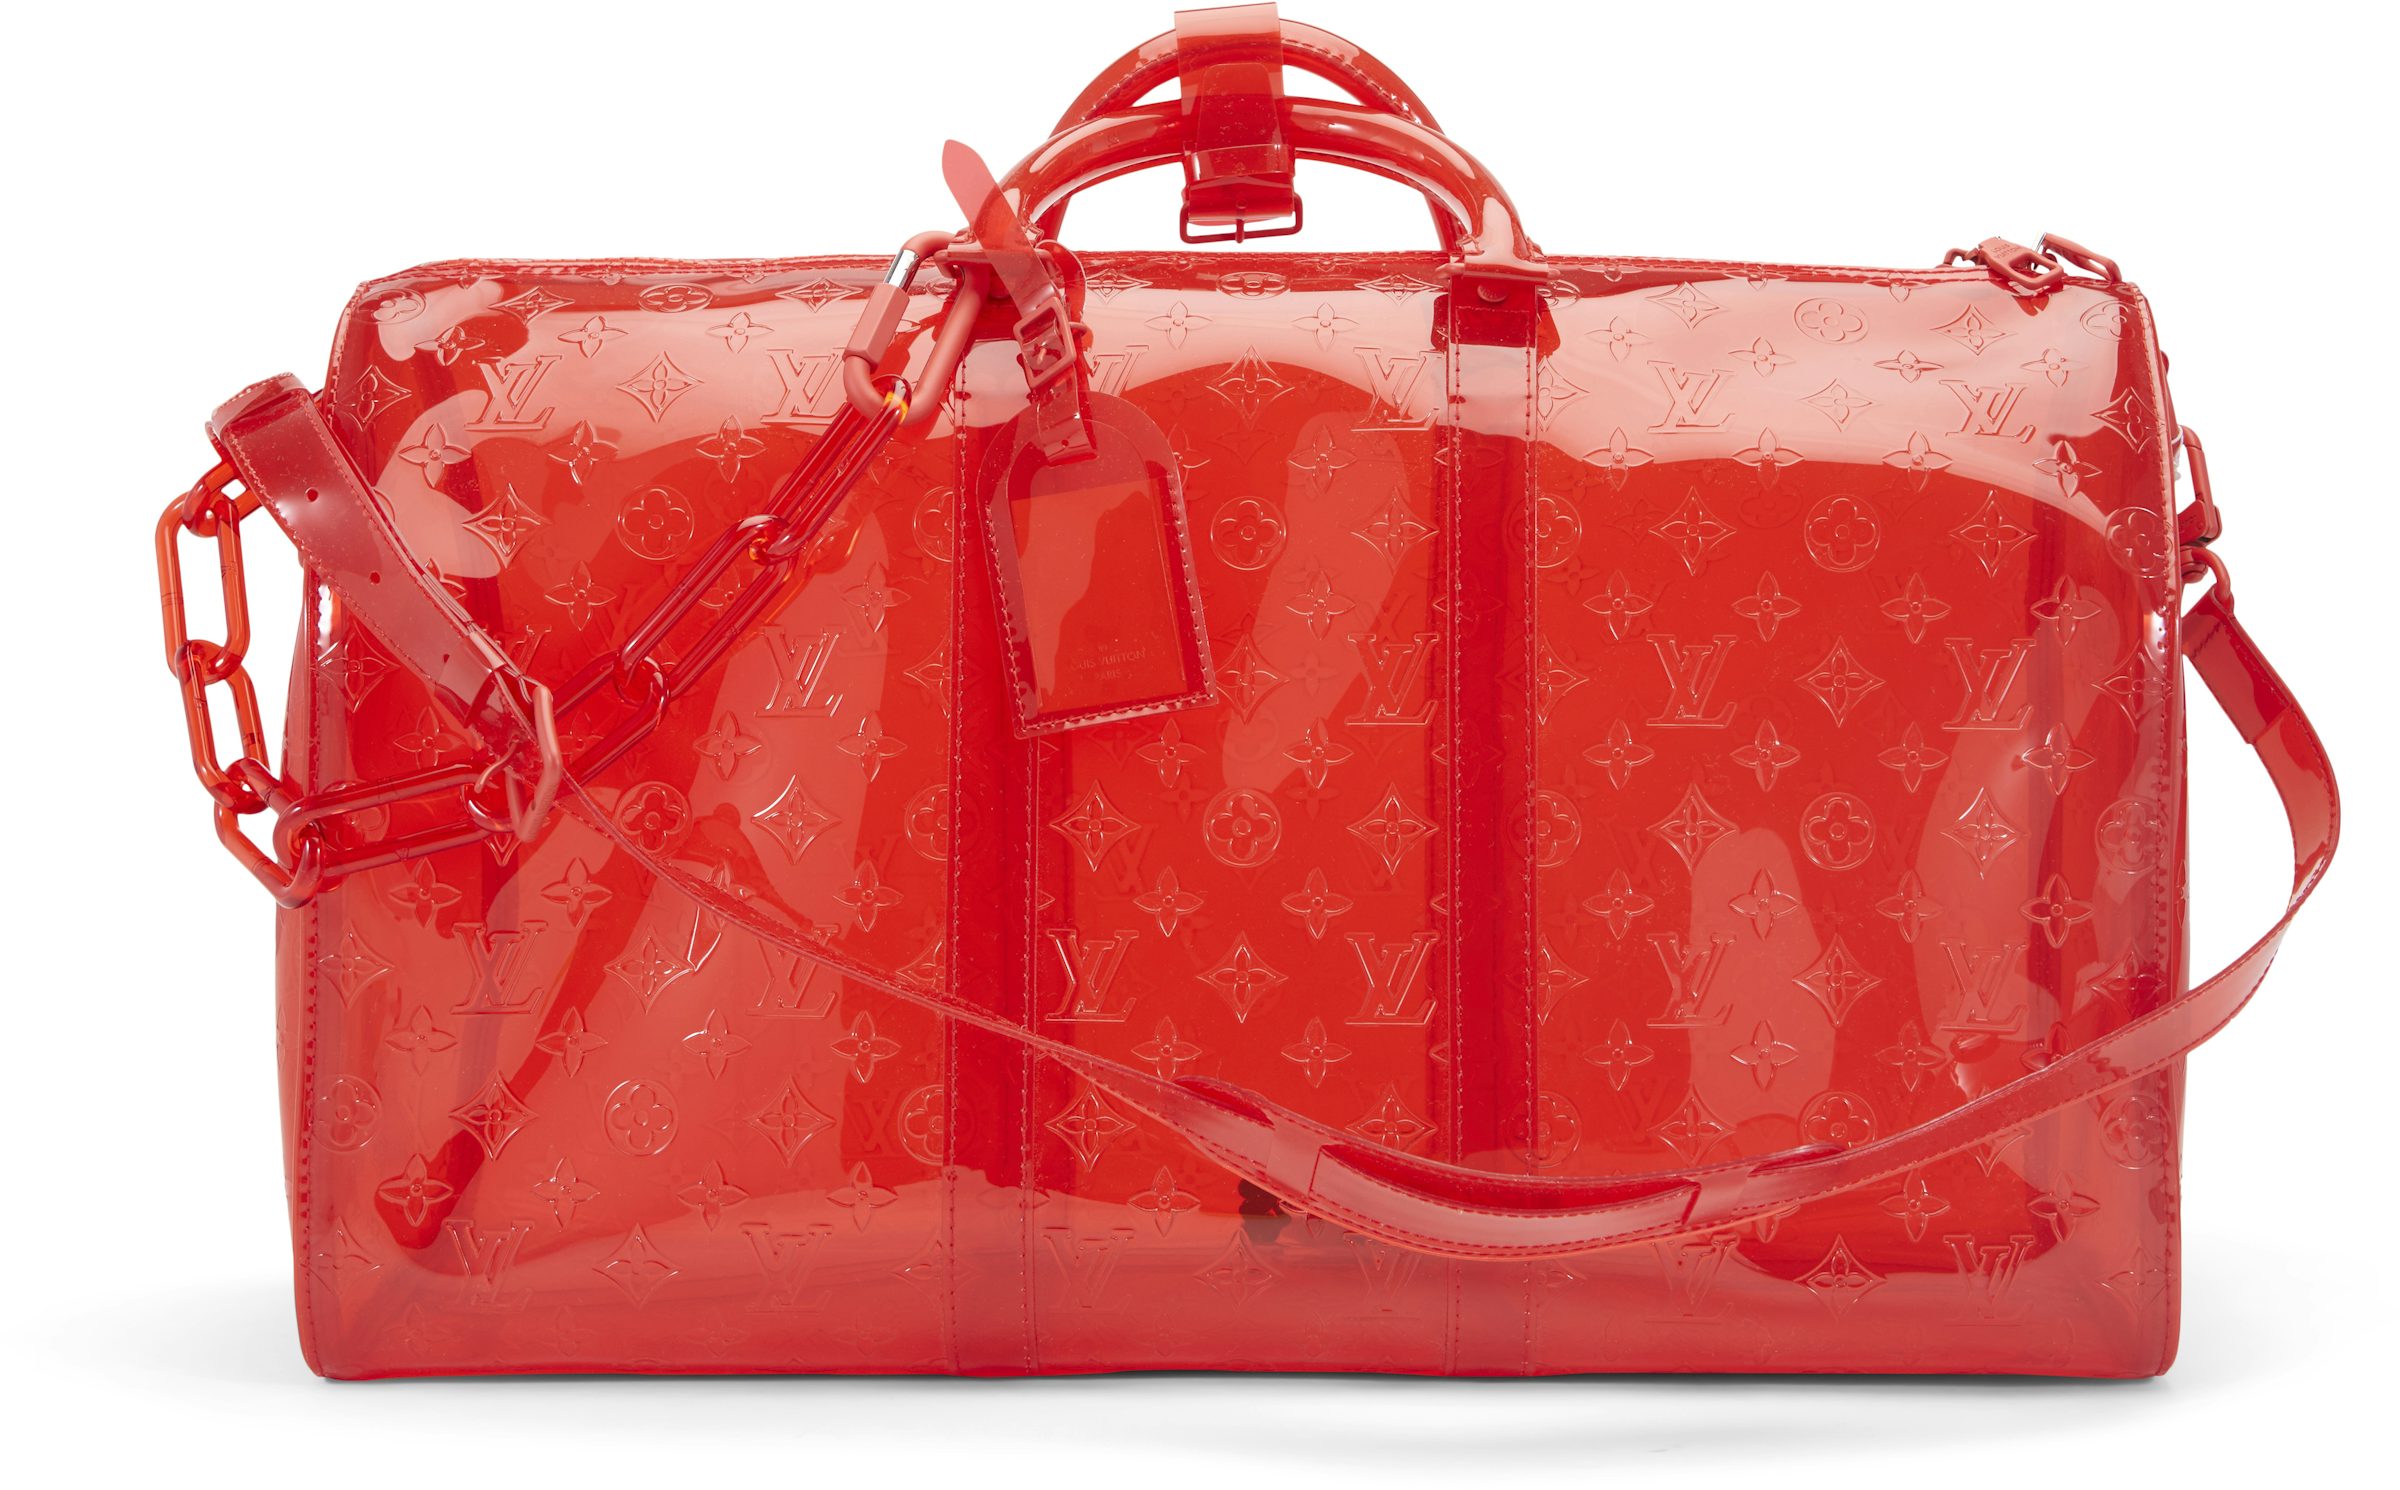 Louis Vuitton Keepall Bandouliere Monogram 50 Red in PVC with